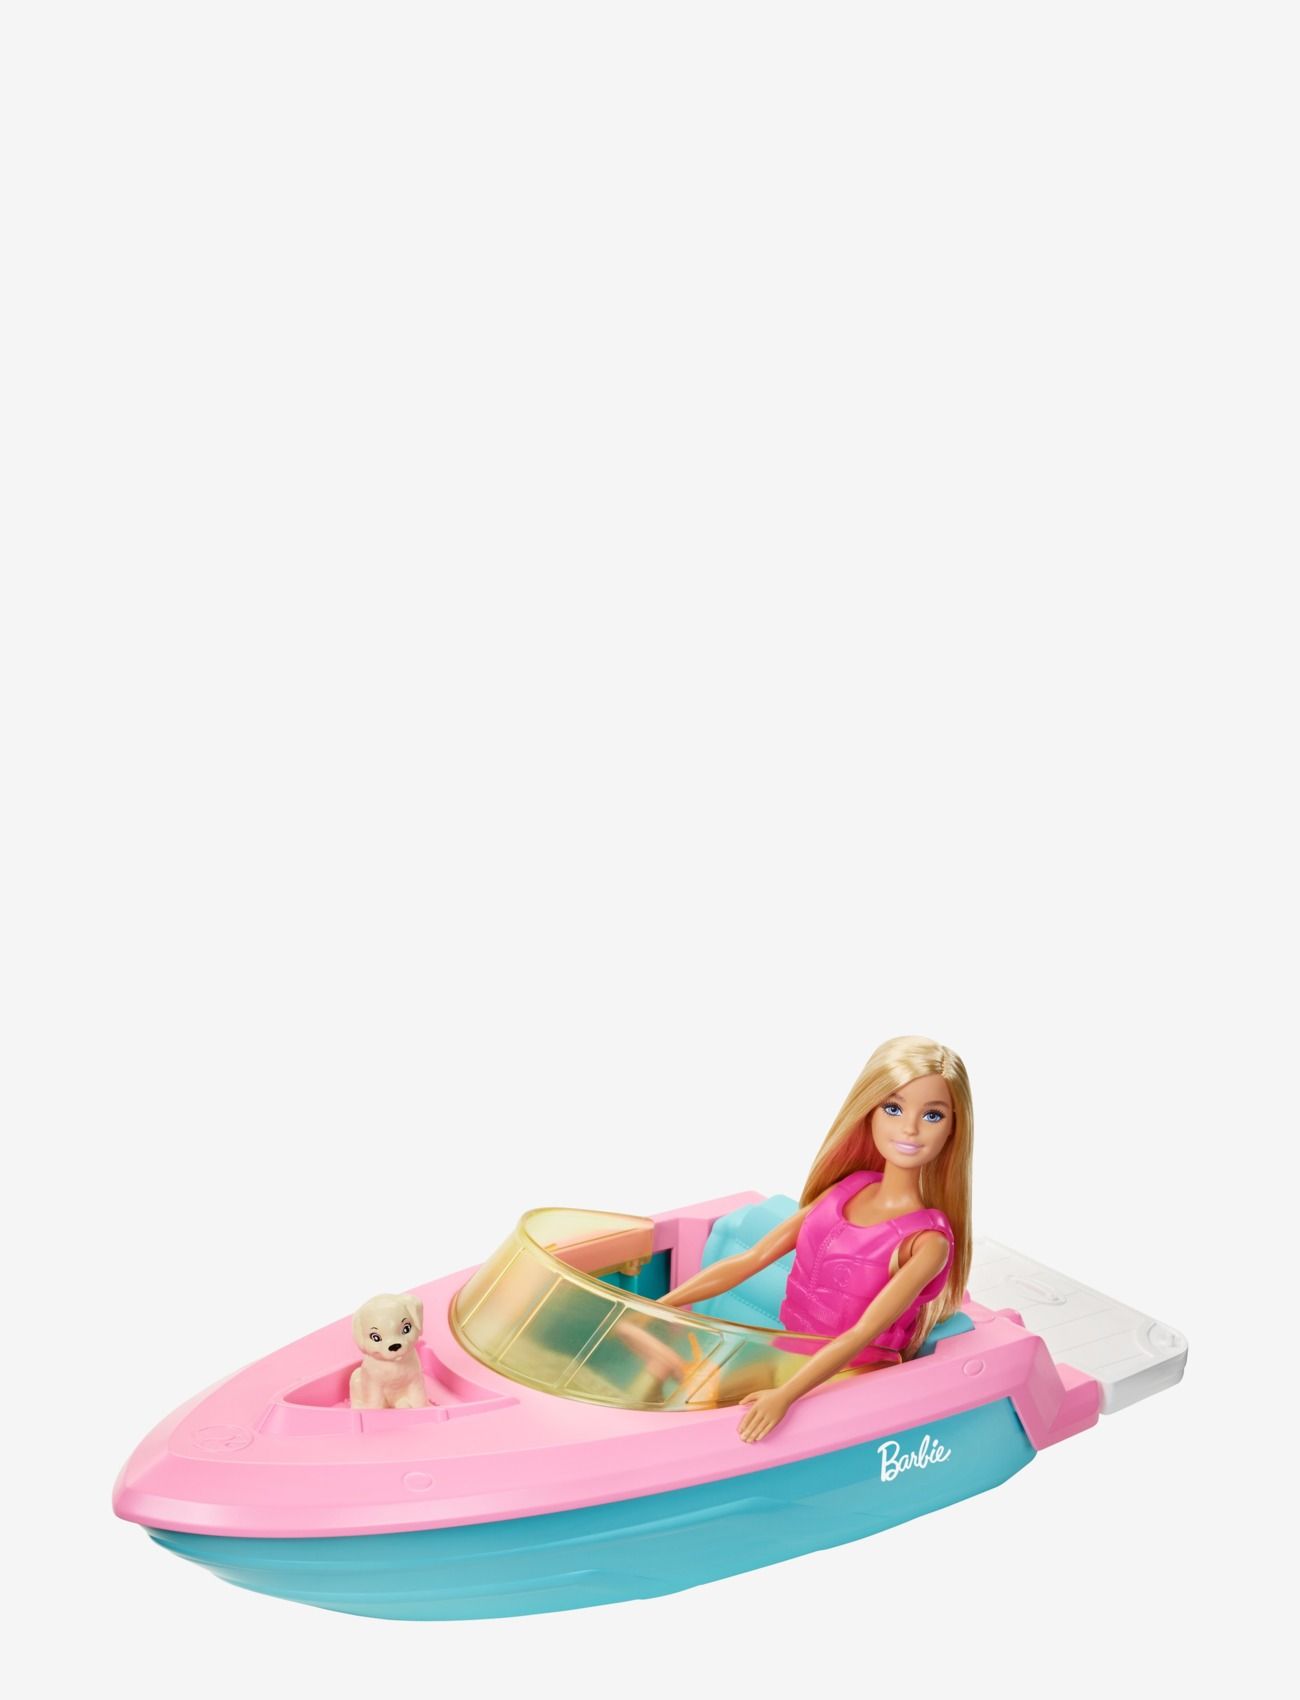 Barbie - Doll and Boat - nuket - multi color - 1